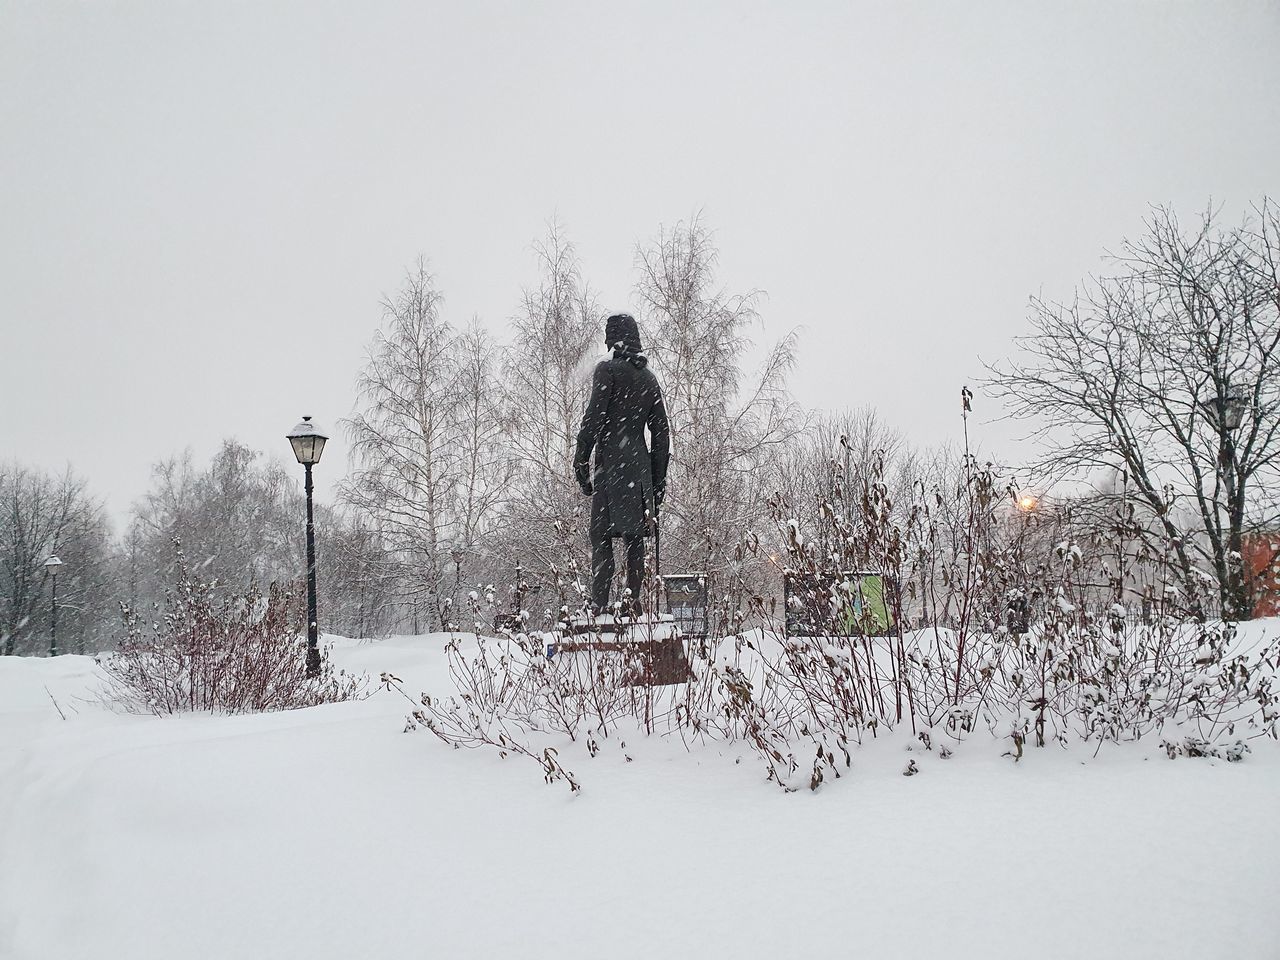 REAR VIEW OF MAN ON SNOW COVERED LAND